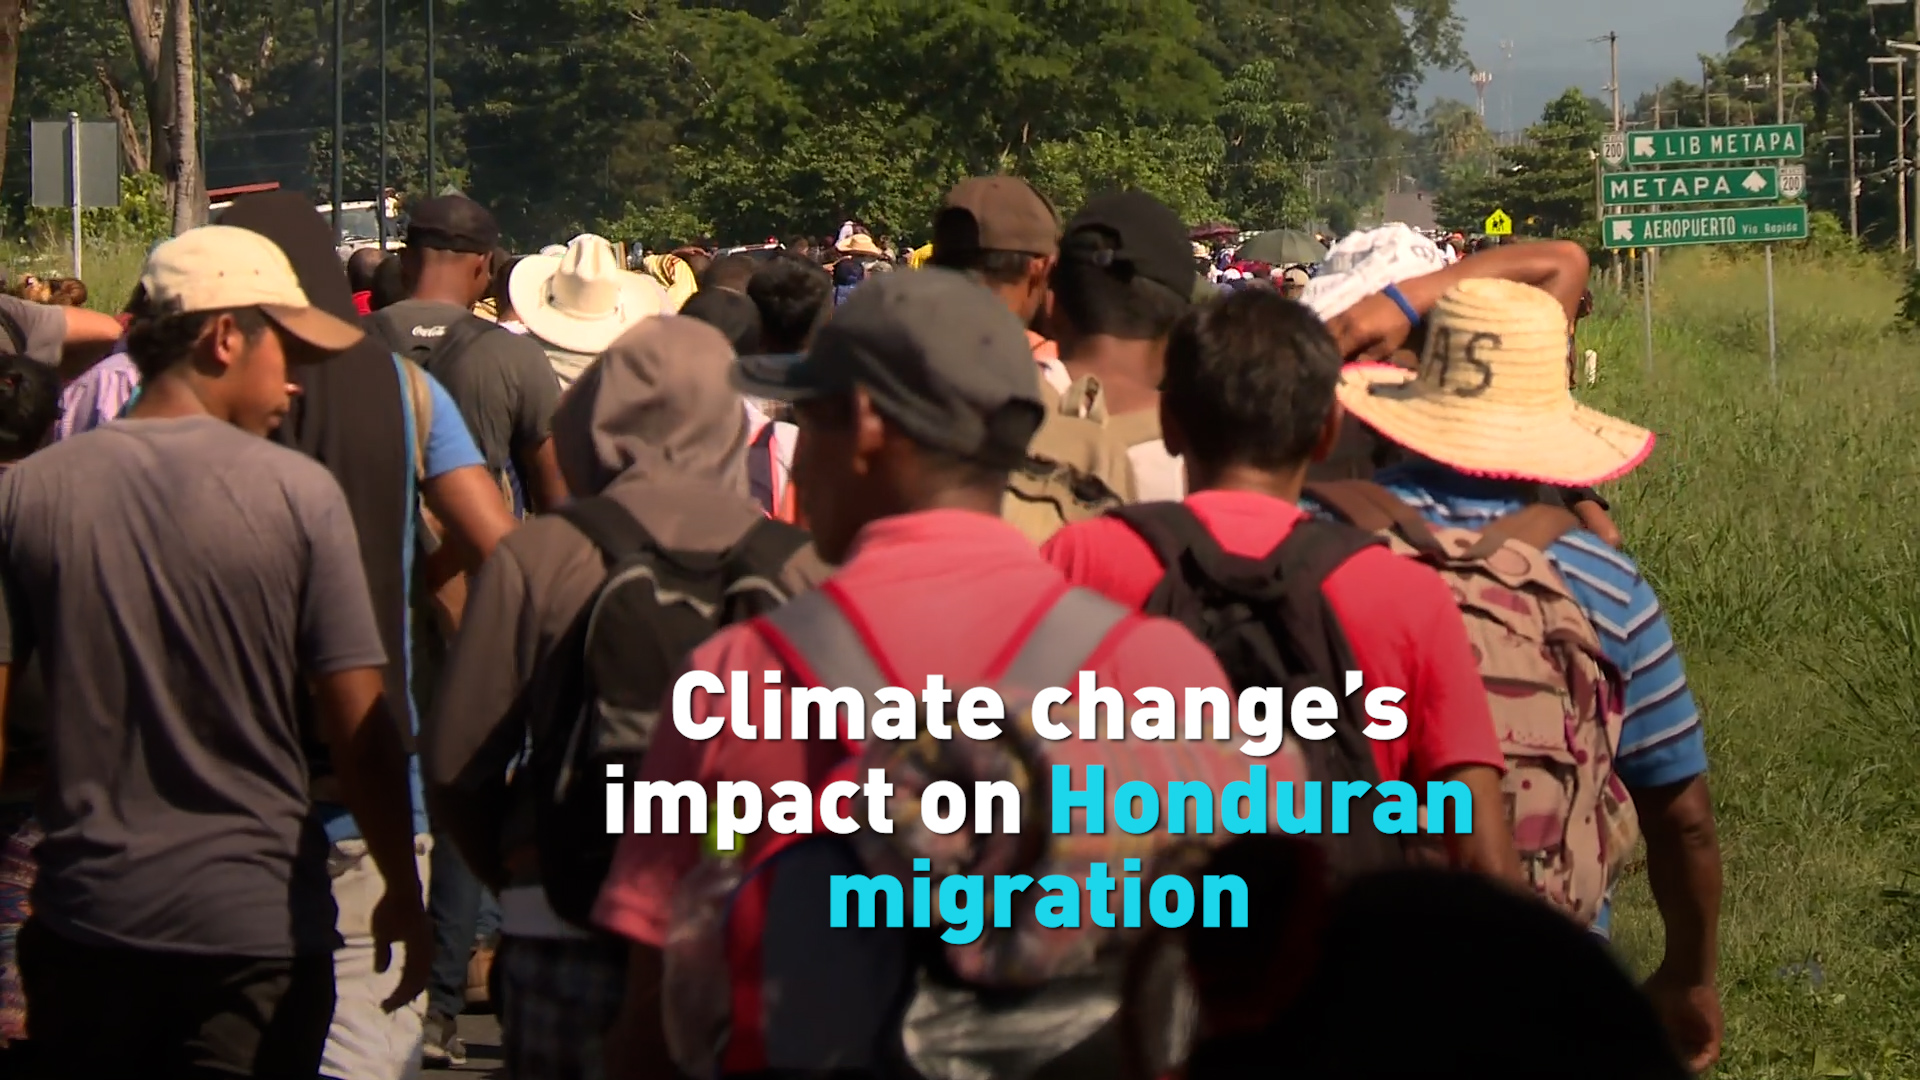 Climate crisis forces many Hondurans to migrate to find better lives